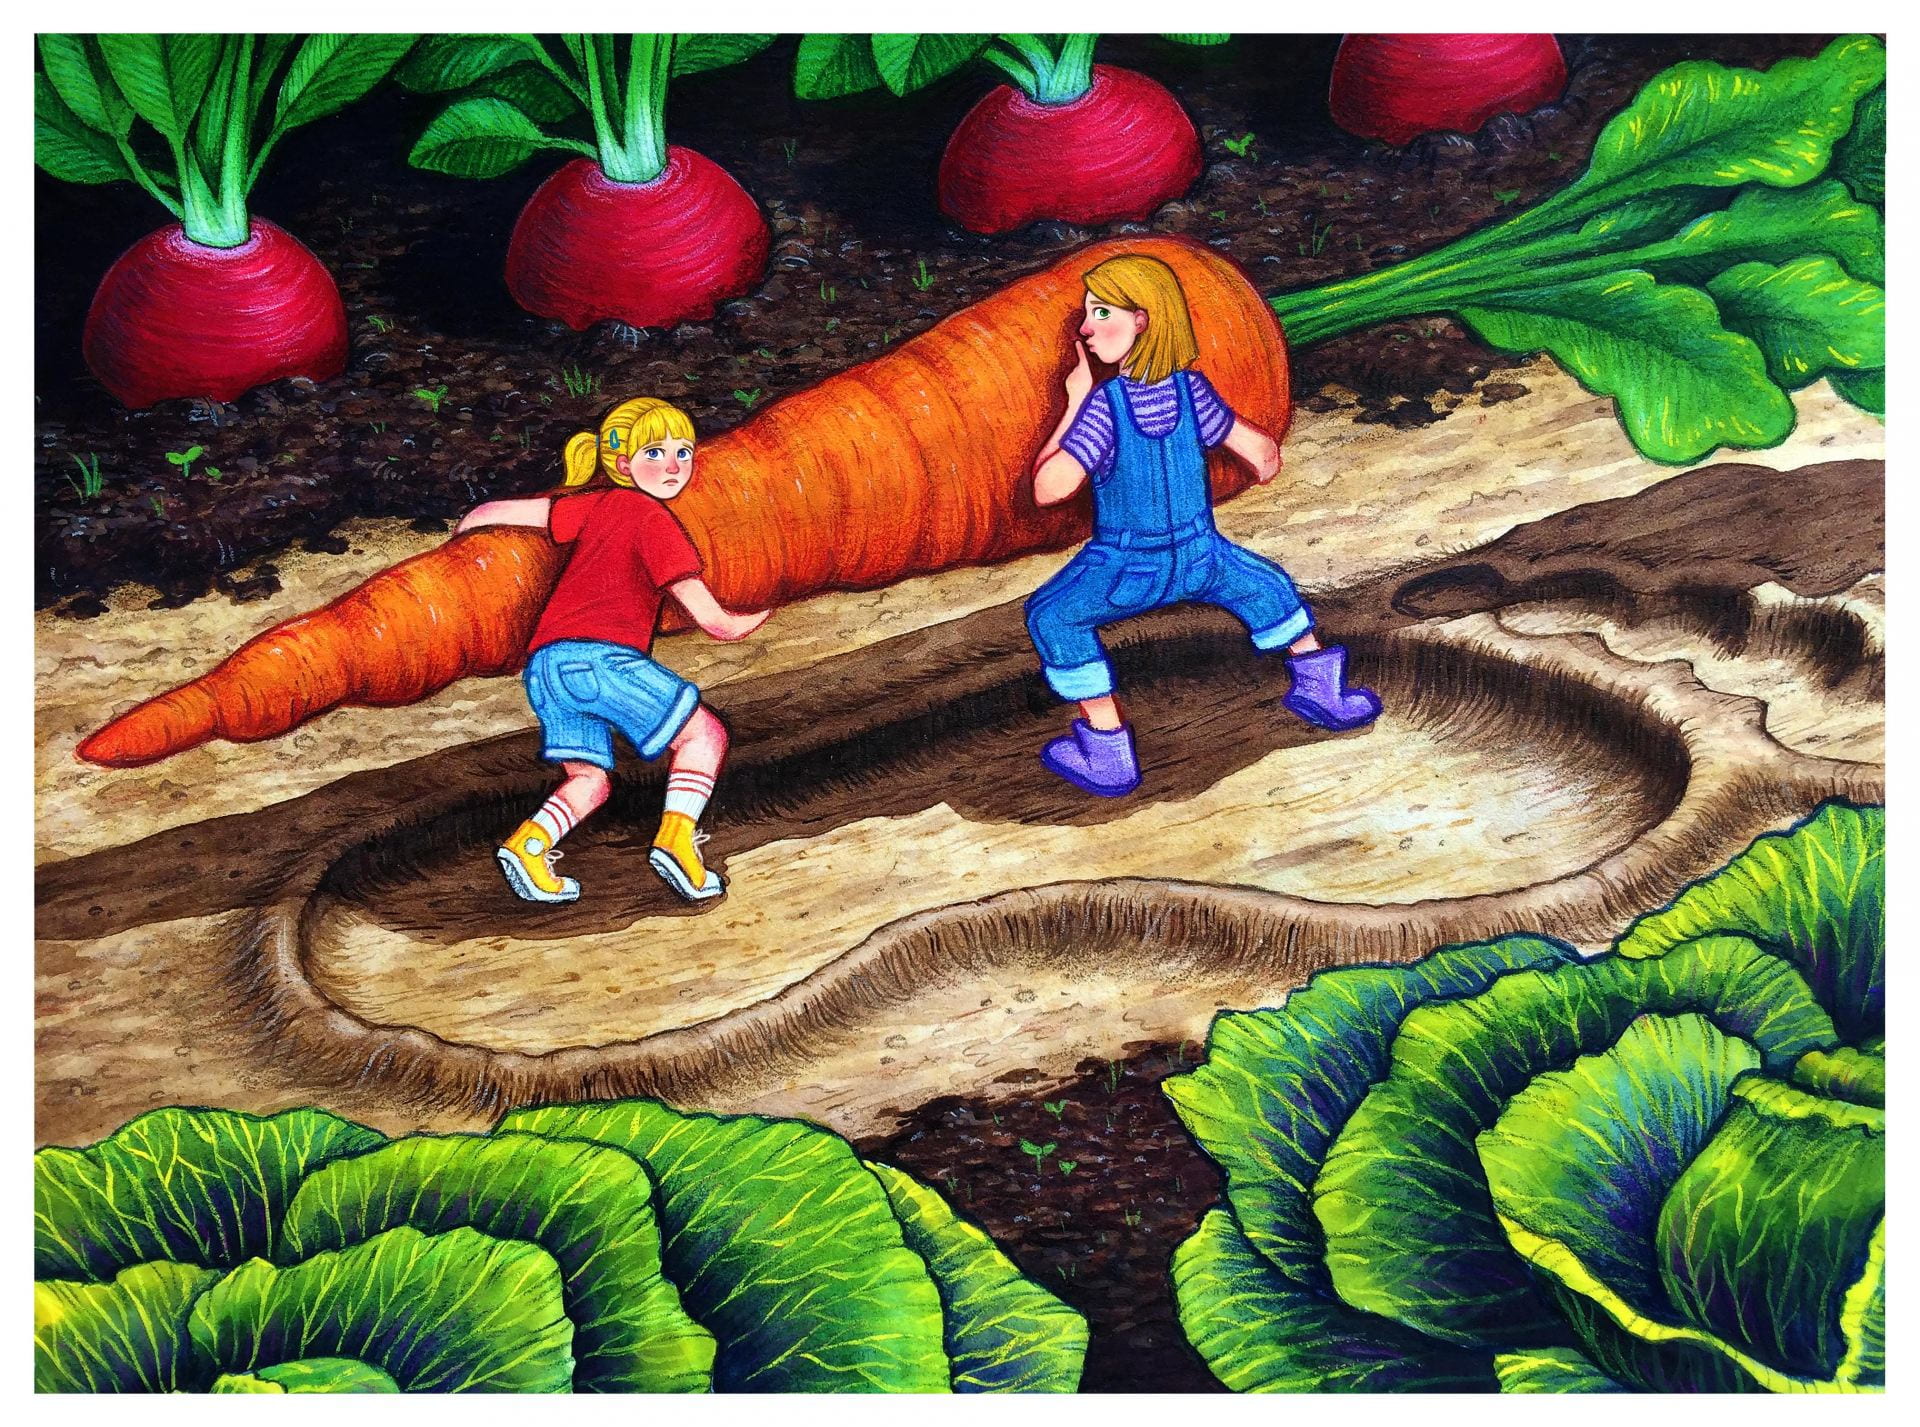 An illustration, two children, lifting a giant carrot within a garden of giant vegetables.